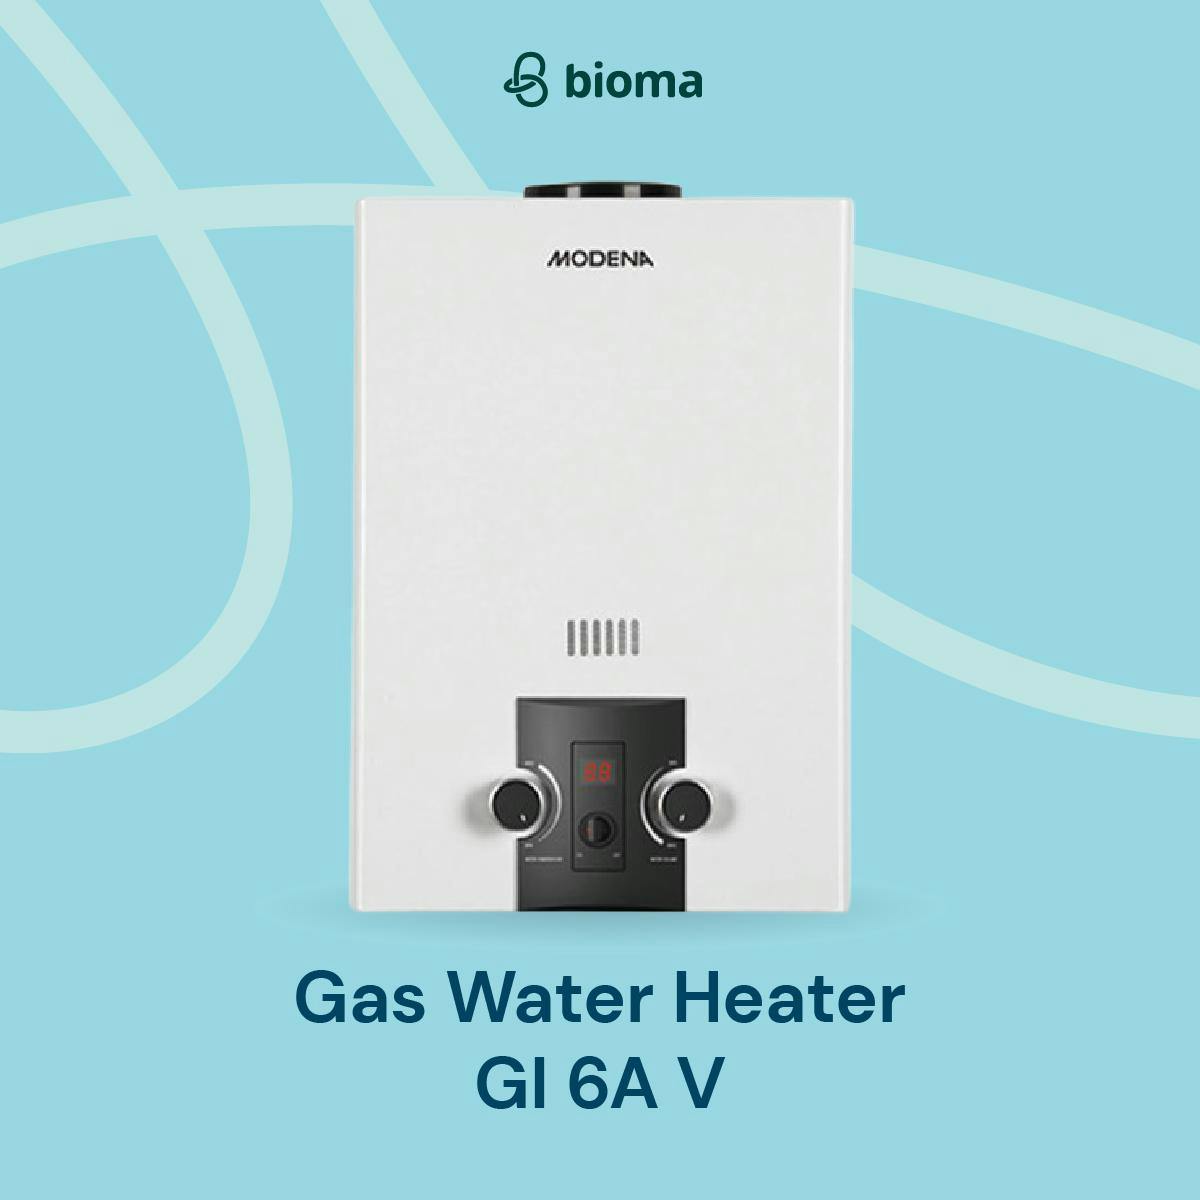 Gas Water Heater GI 6A V